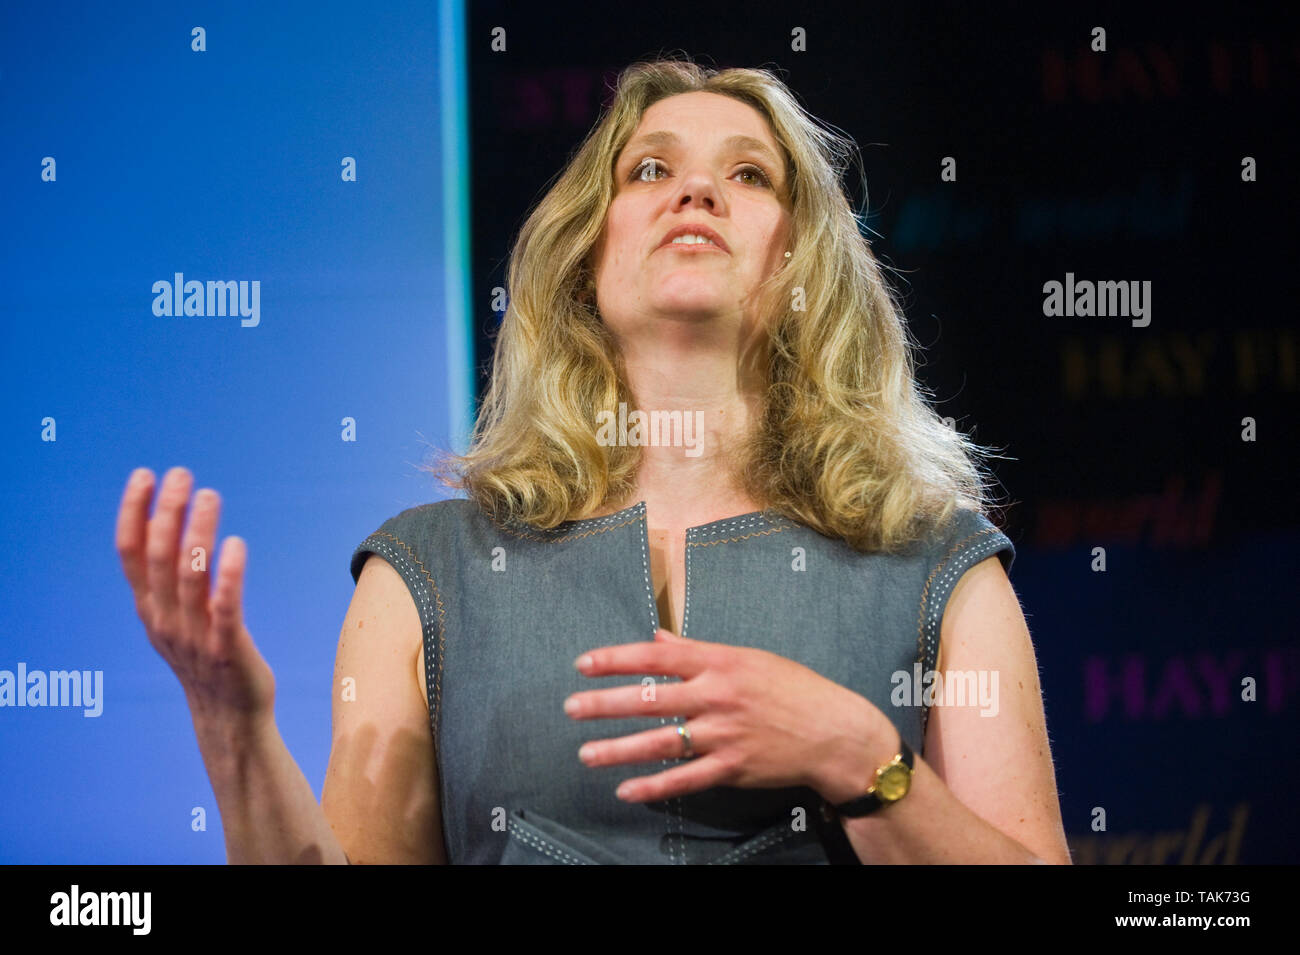 Emily Shuckburgh OBE climate scientist and mathematician speaking about climate change on stage at Hay Festival Hay-on-Wye Powys Wales UK Stock Photo